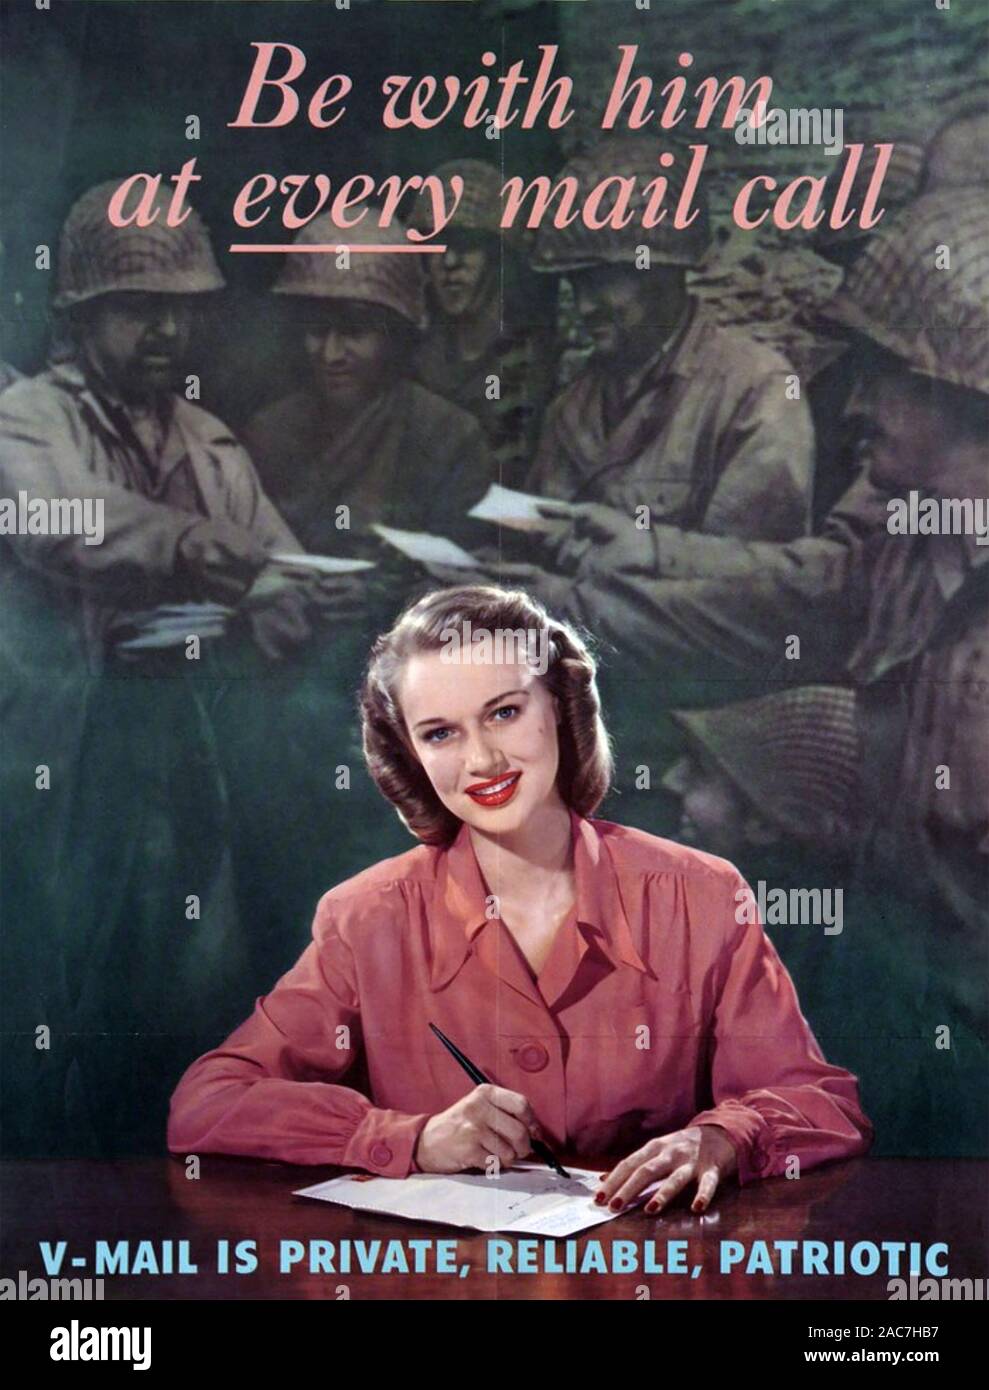 BE WITH HIM AT EVERY MAIL CALL  American WW2 Morale boosting poster. Stock Photo